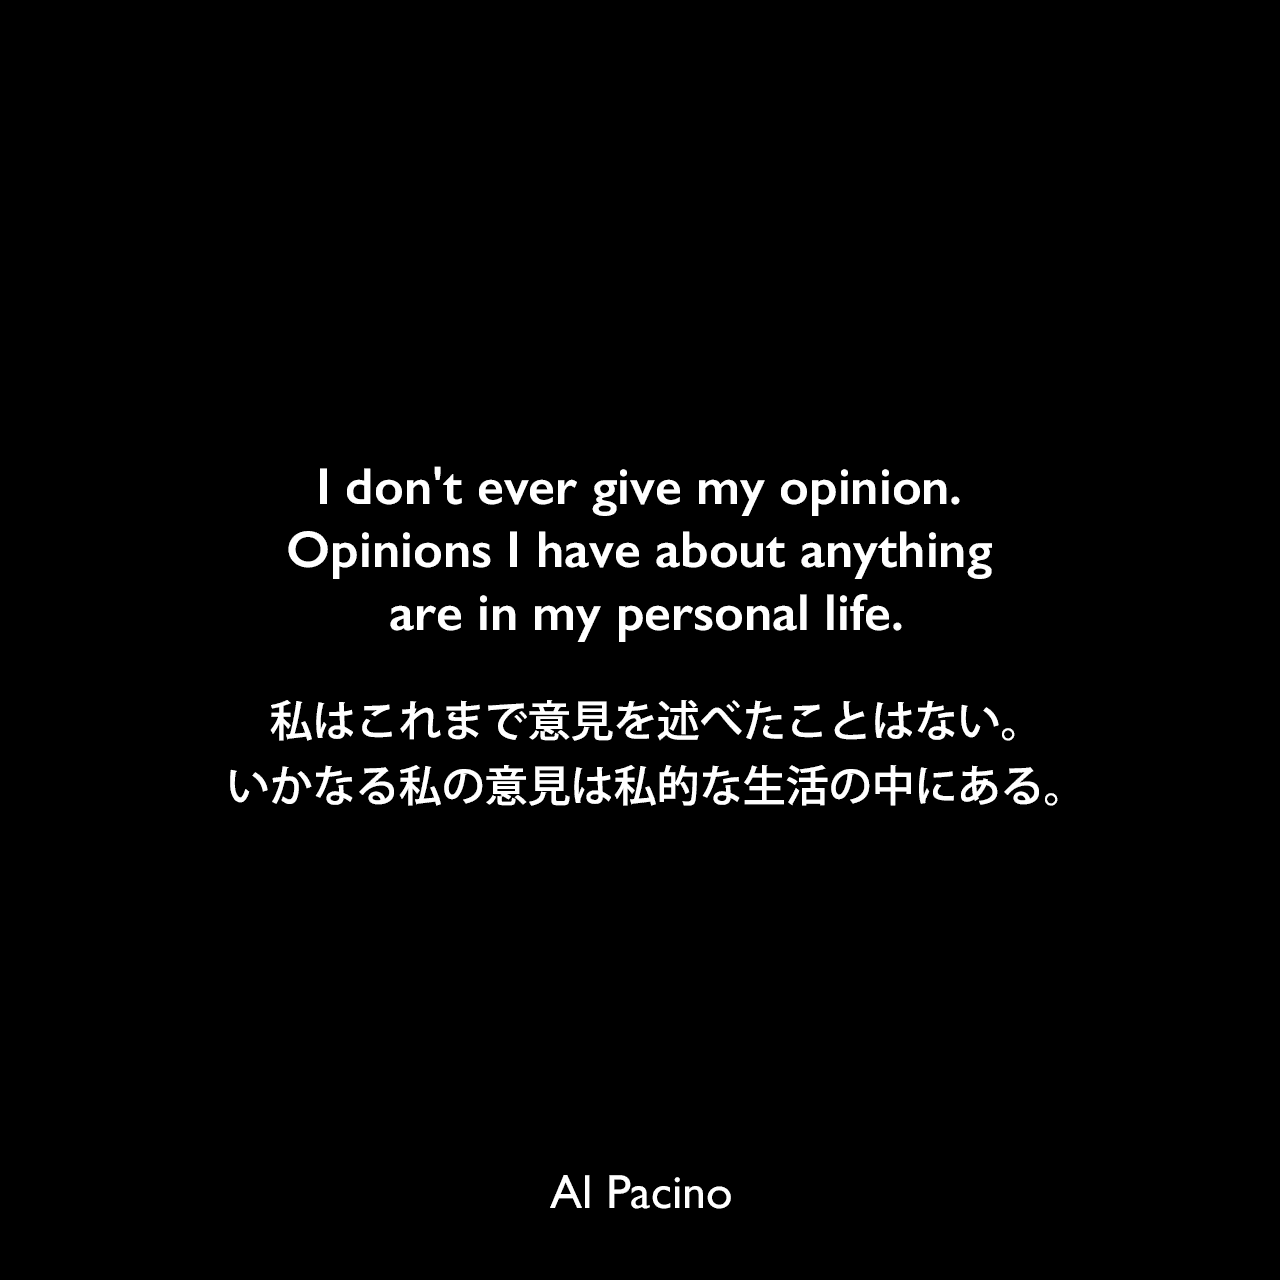 I don't ever give my opinion. Opinions I have about anything are in my personal life.私はこれまで意見を述べたことはない。いかなる私の意見は私的な生活の中にある。Al Pacino